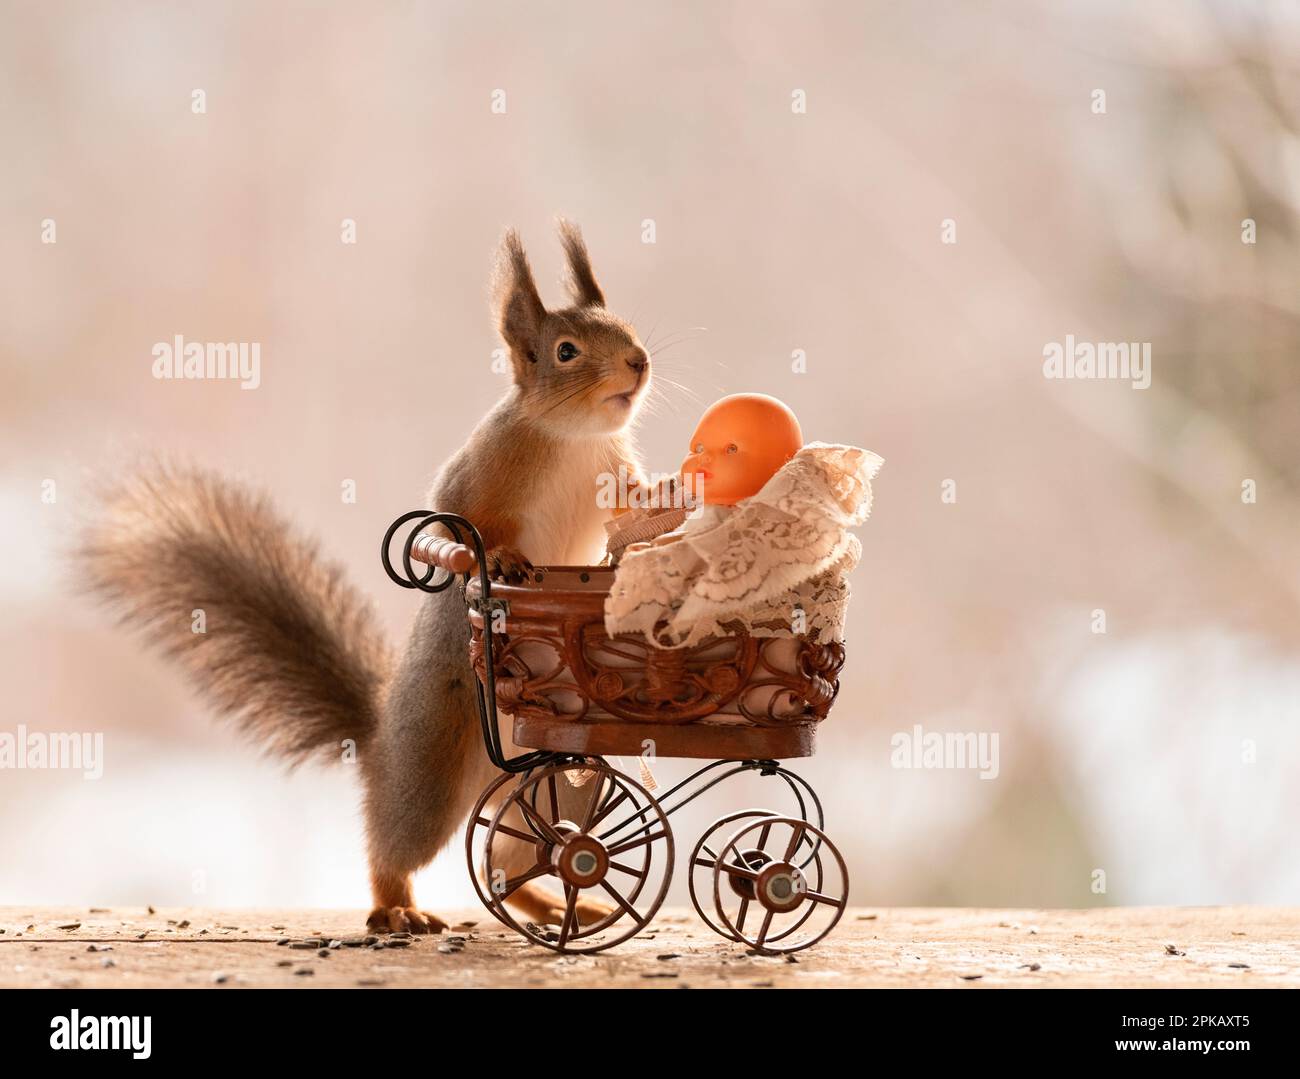 Red Squirrel with an stroller and baby doll Stock Photo